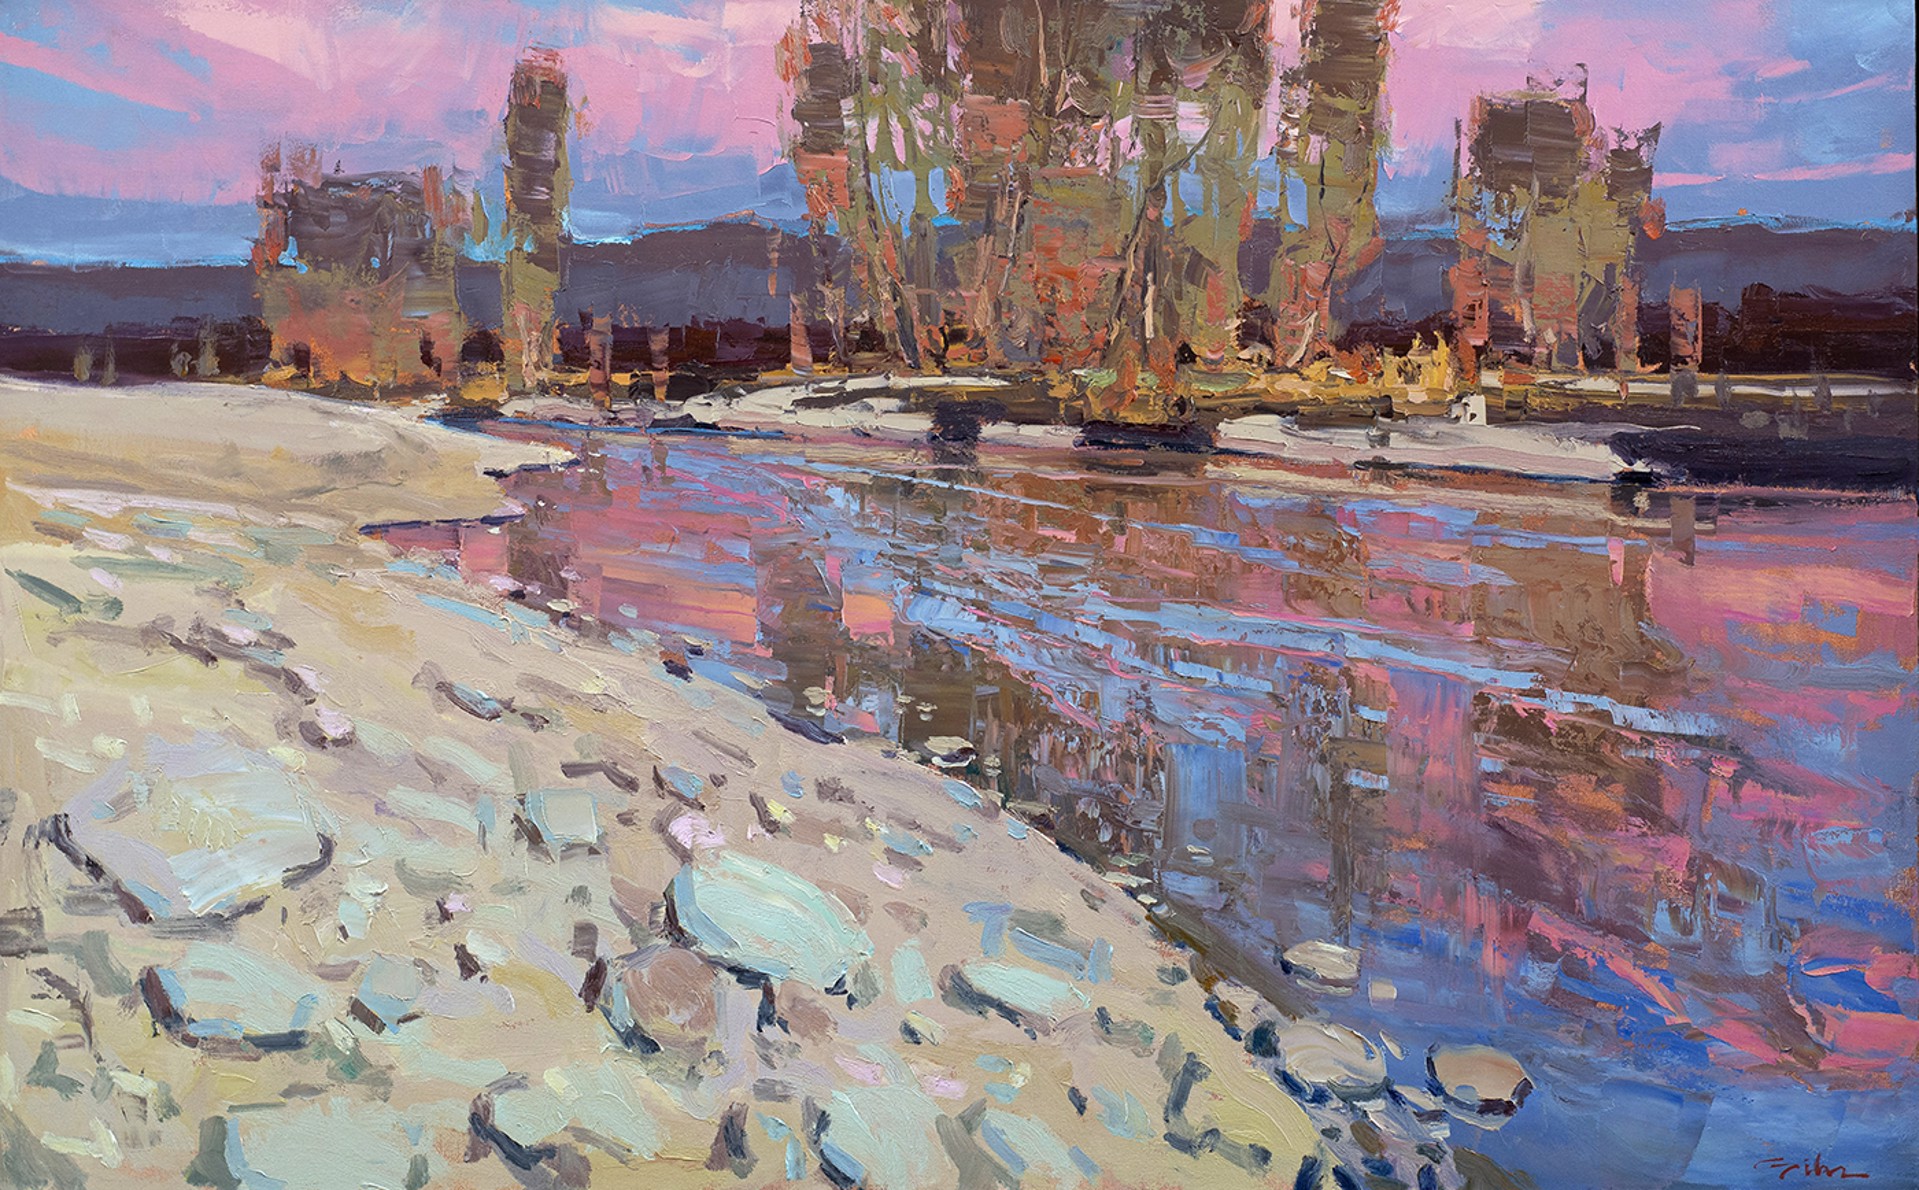 Original Oil Painting By Silas Thompson Featuring A River Landscape At Sunrise